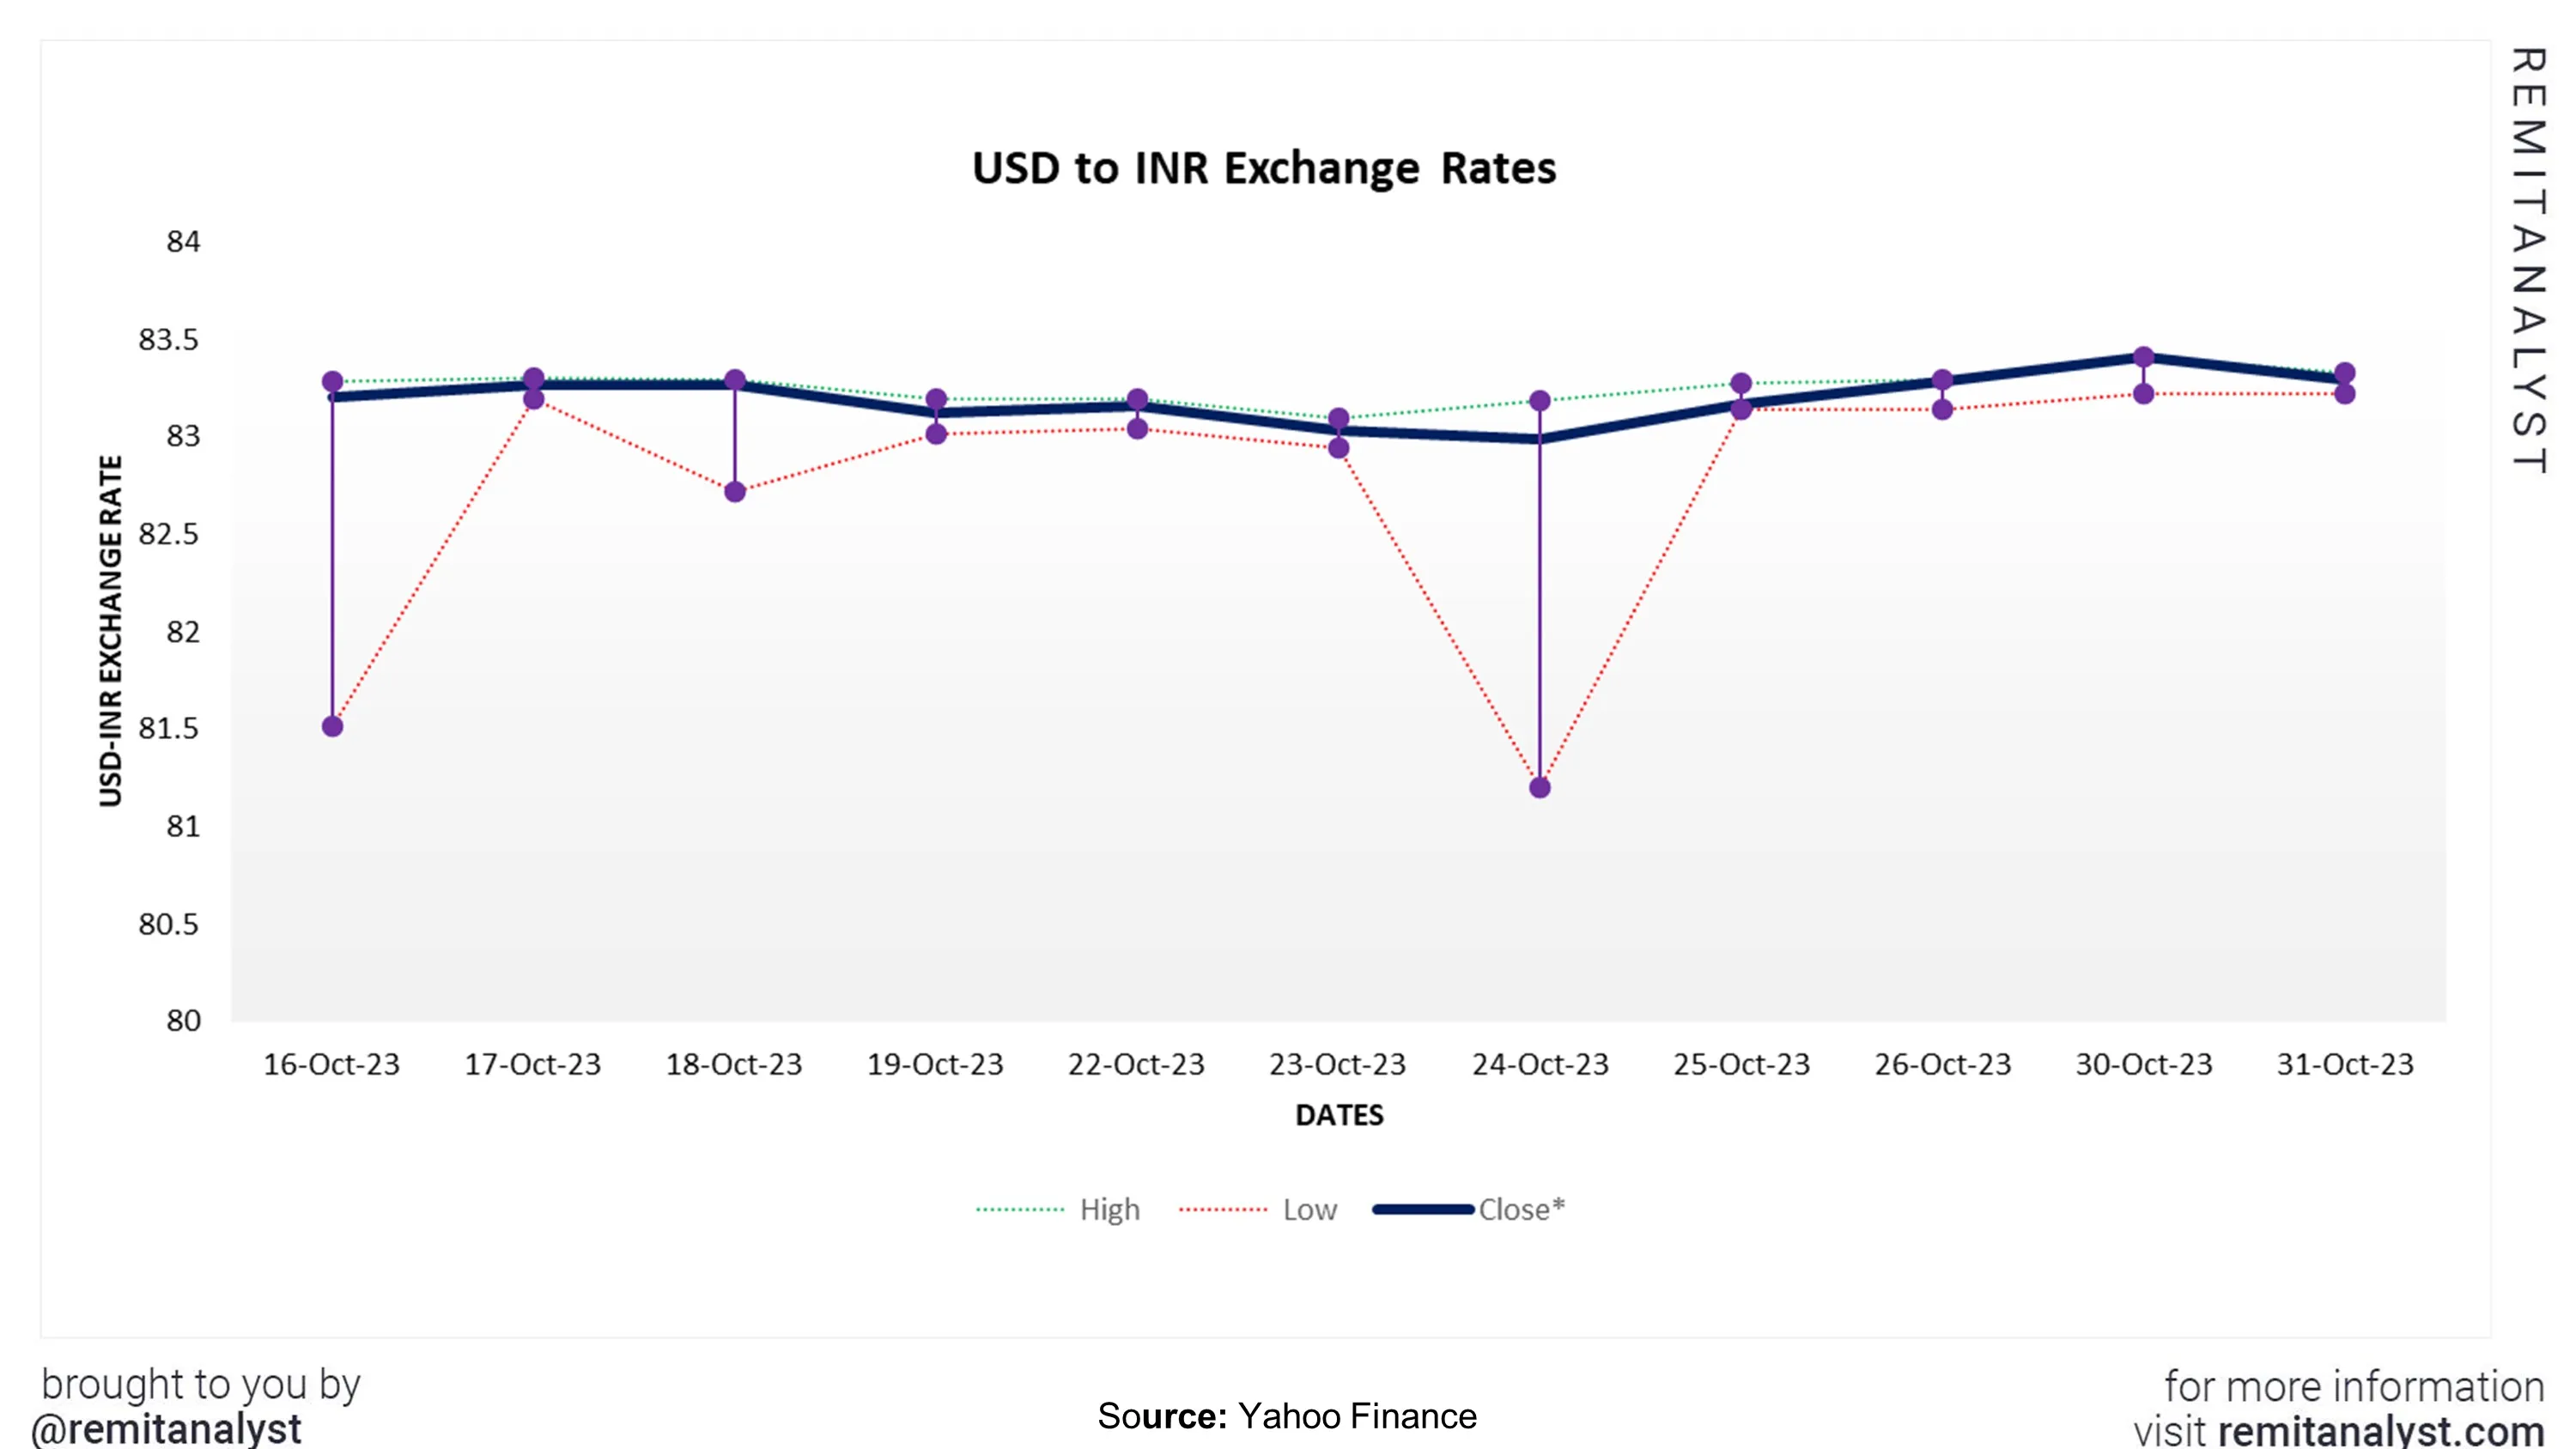 usd-to-inr-exchange-rate-from-16-oct-2023-to-31-oct-2023